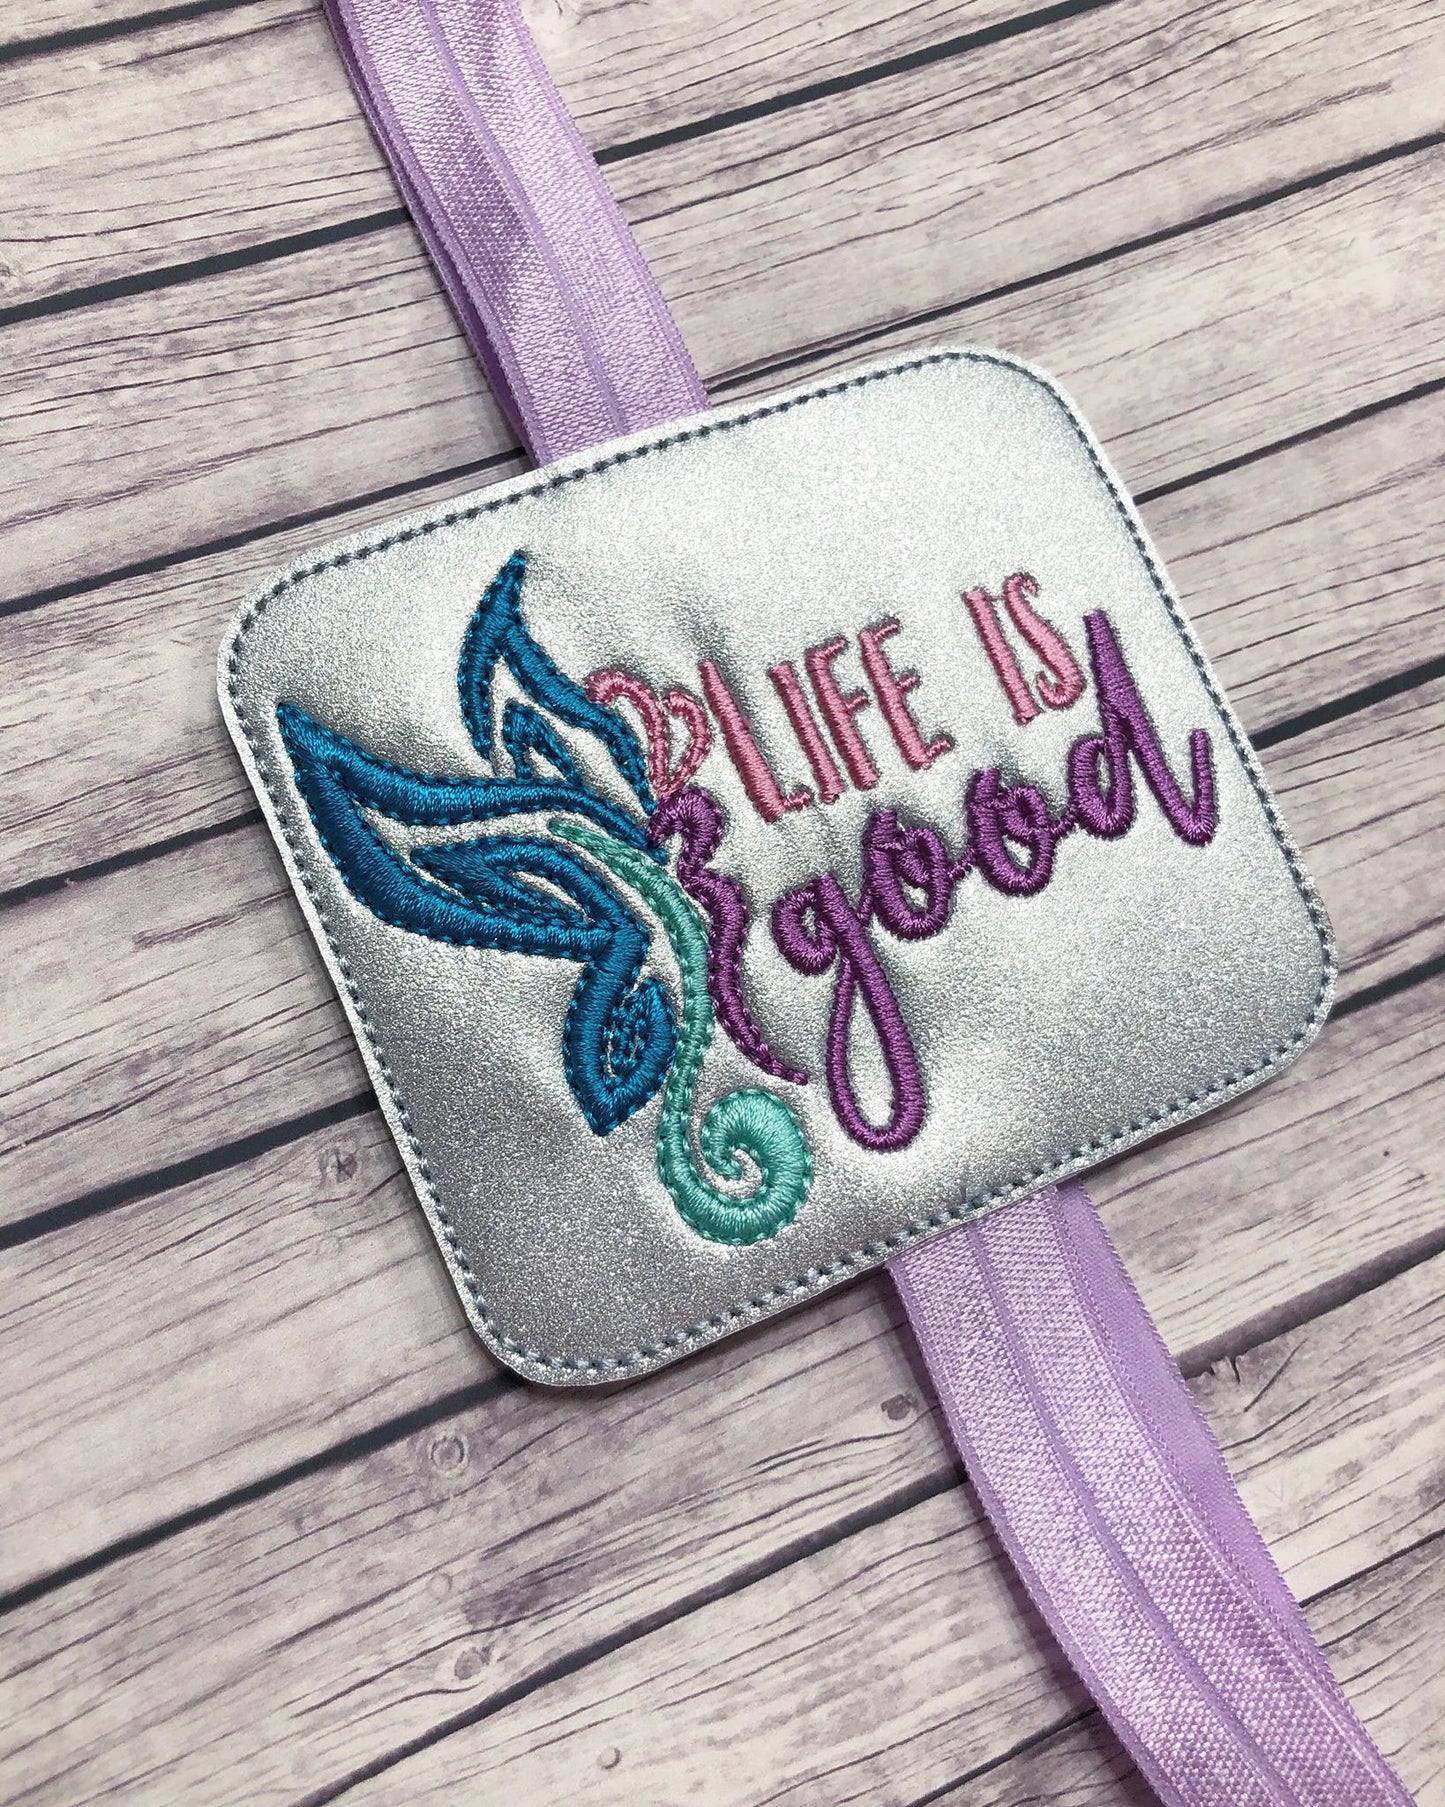 Life is Good Book Band - Digital Embroidery Design